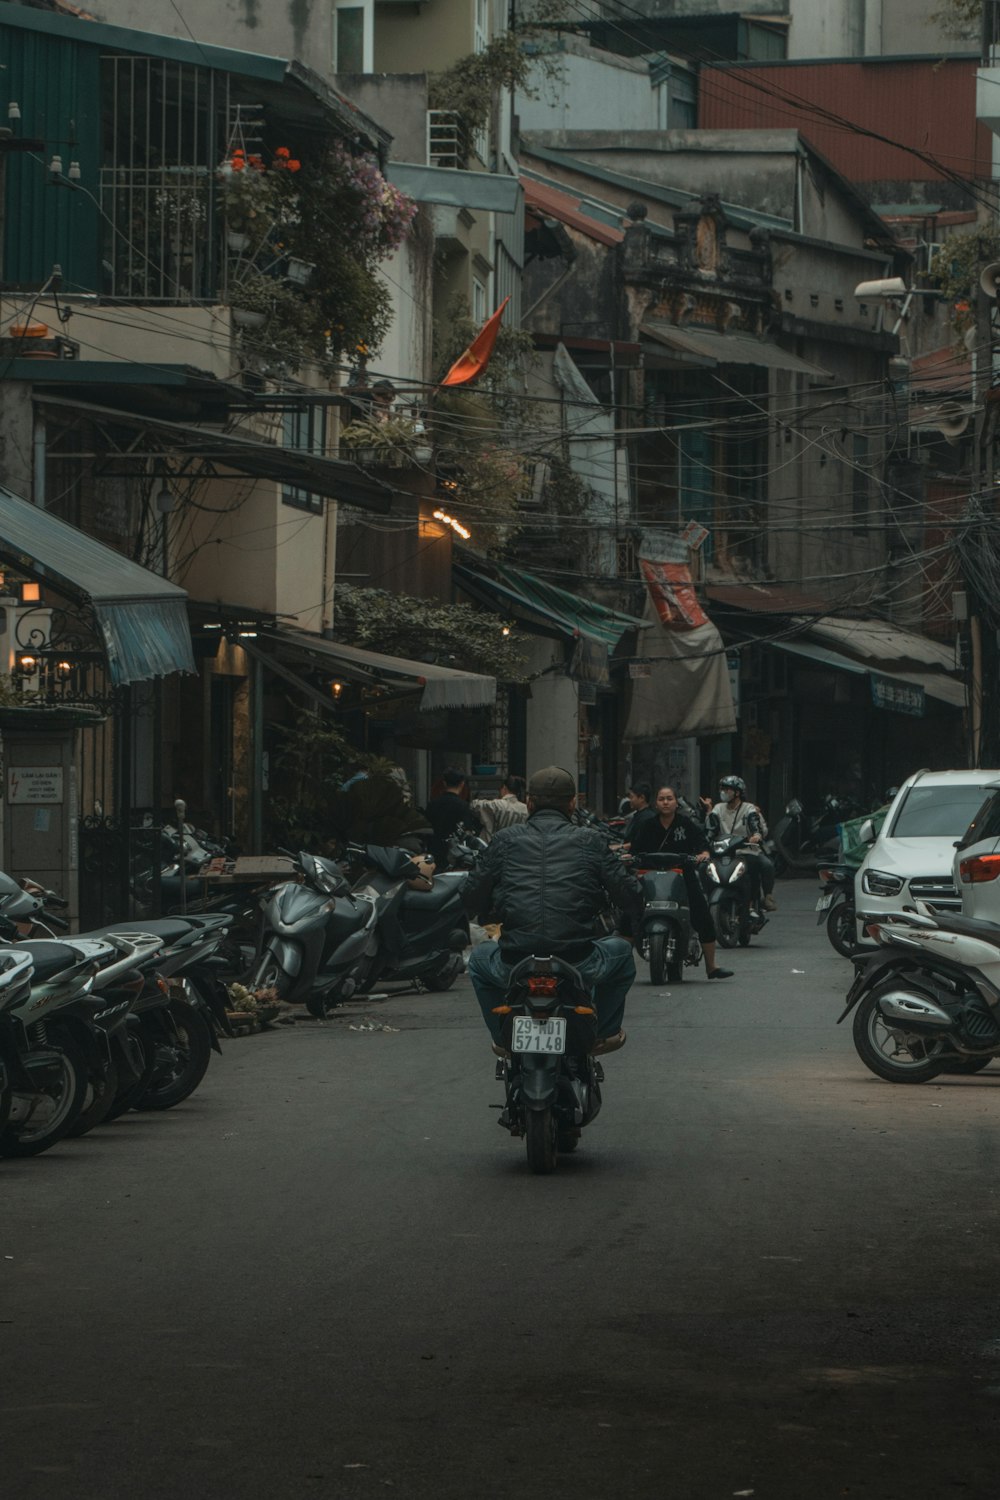 a man riding a motorcycle down a street next to parked motorcycles